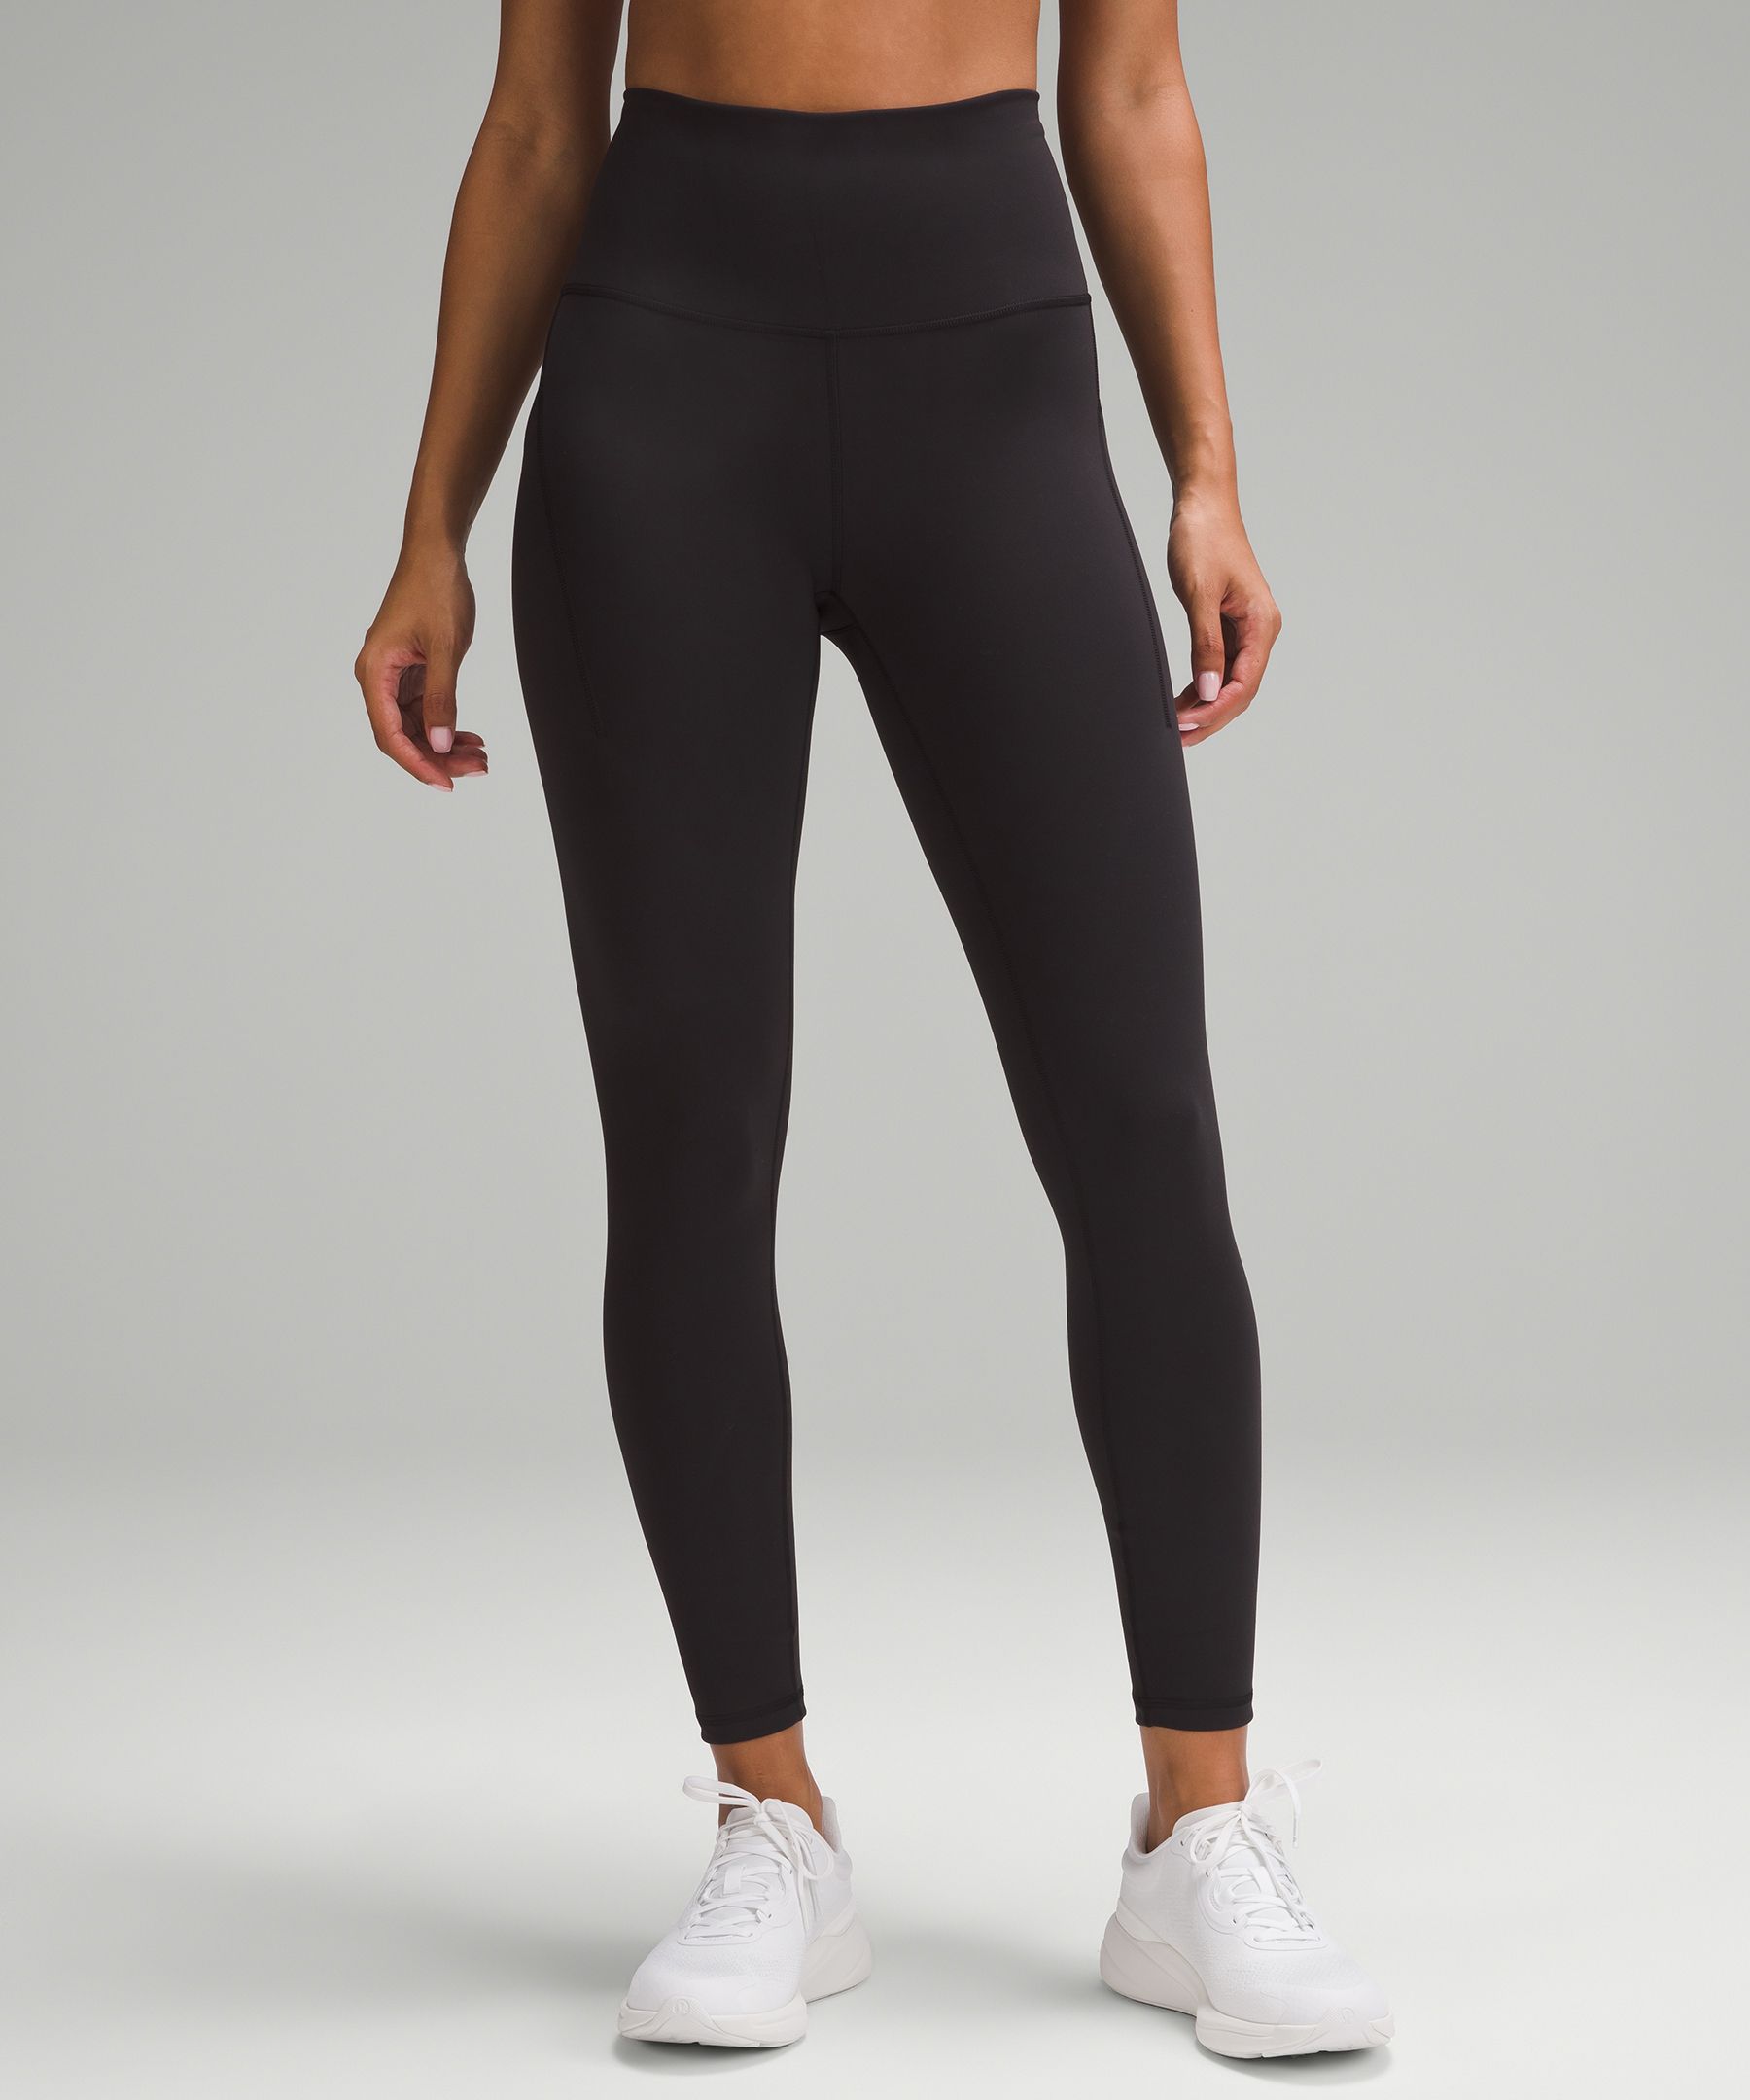 lululemon New Zealand | Yoga Clothes and Activewear | The Official Site